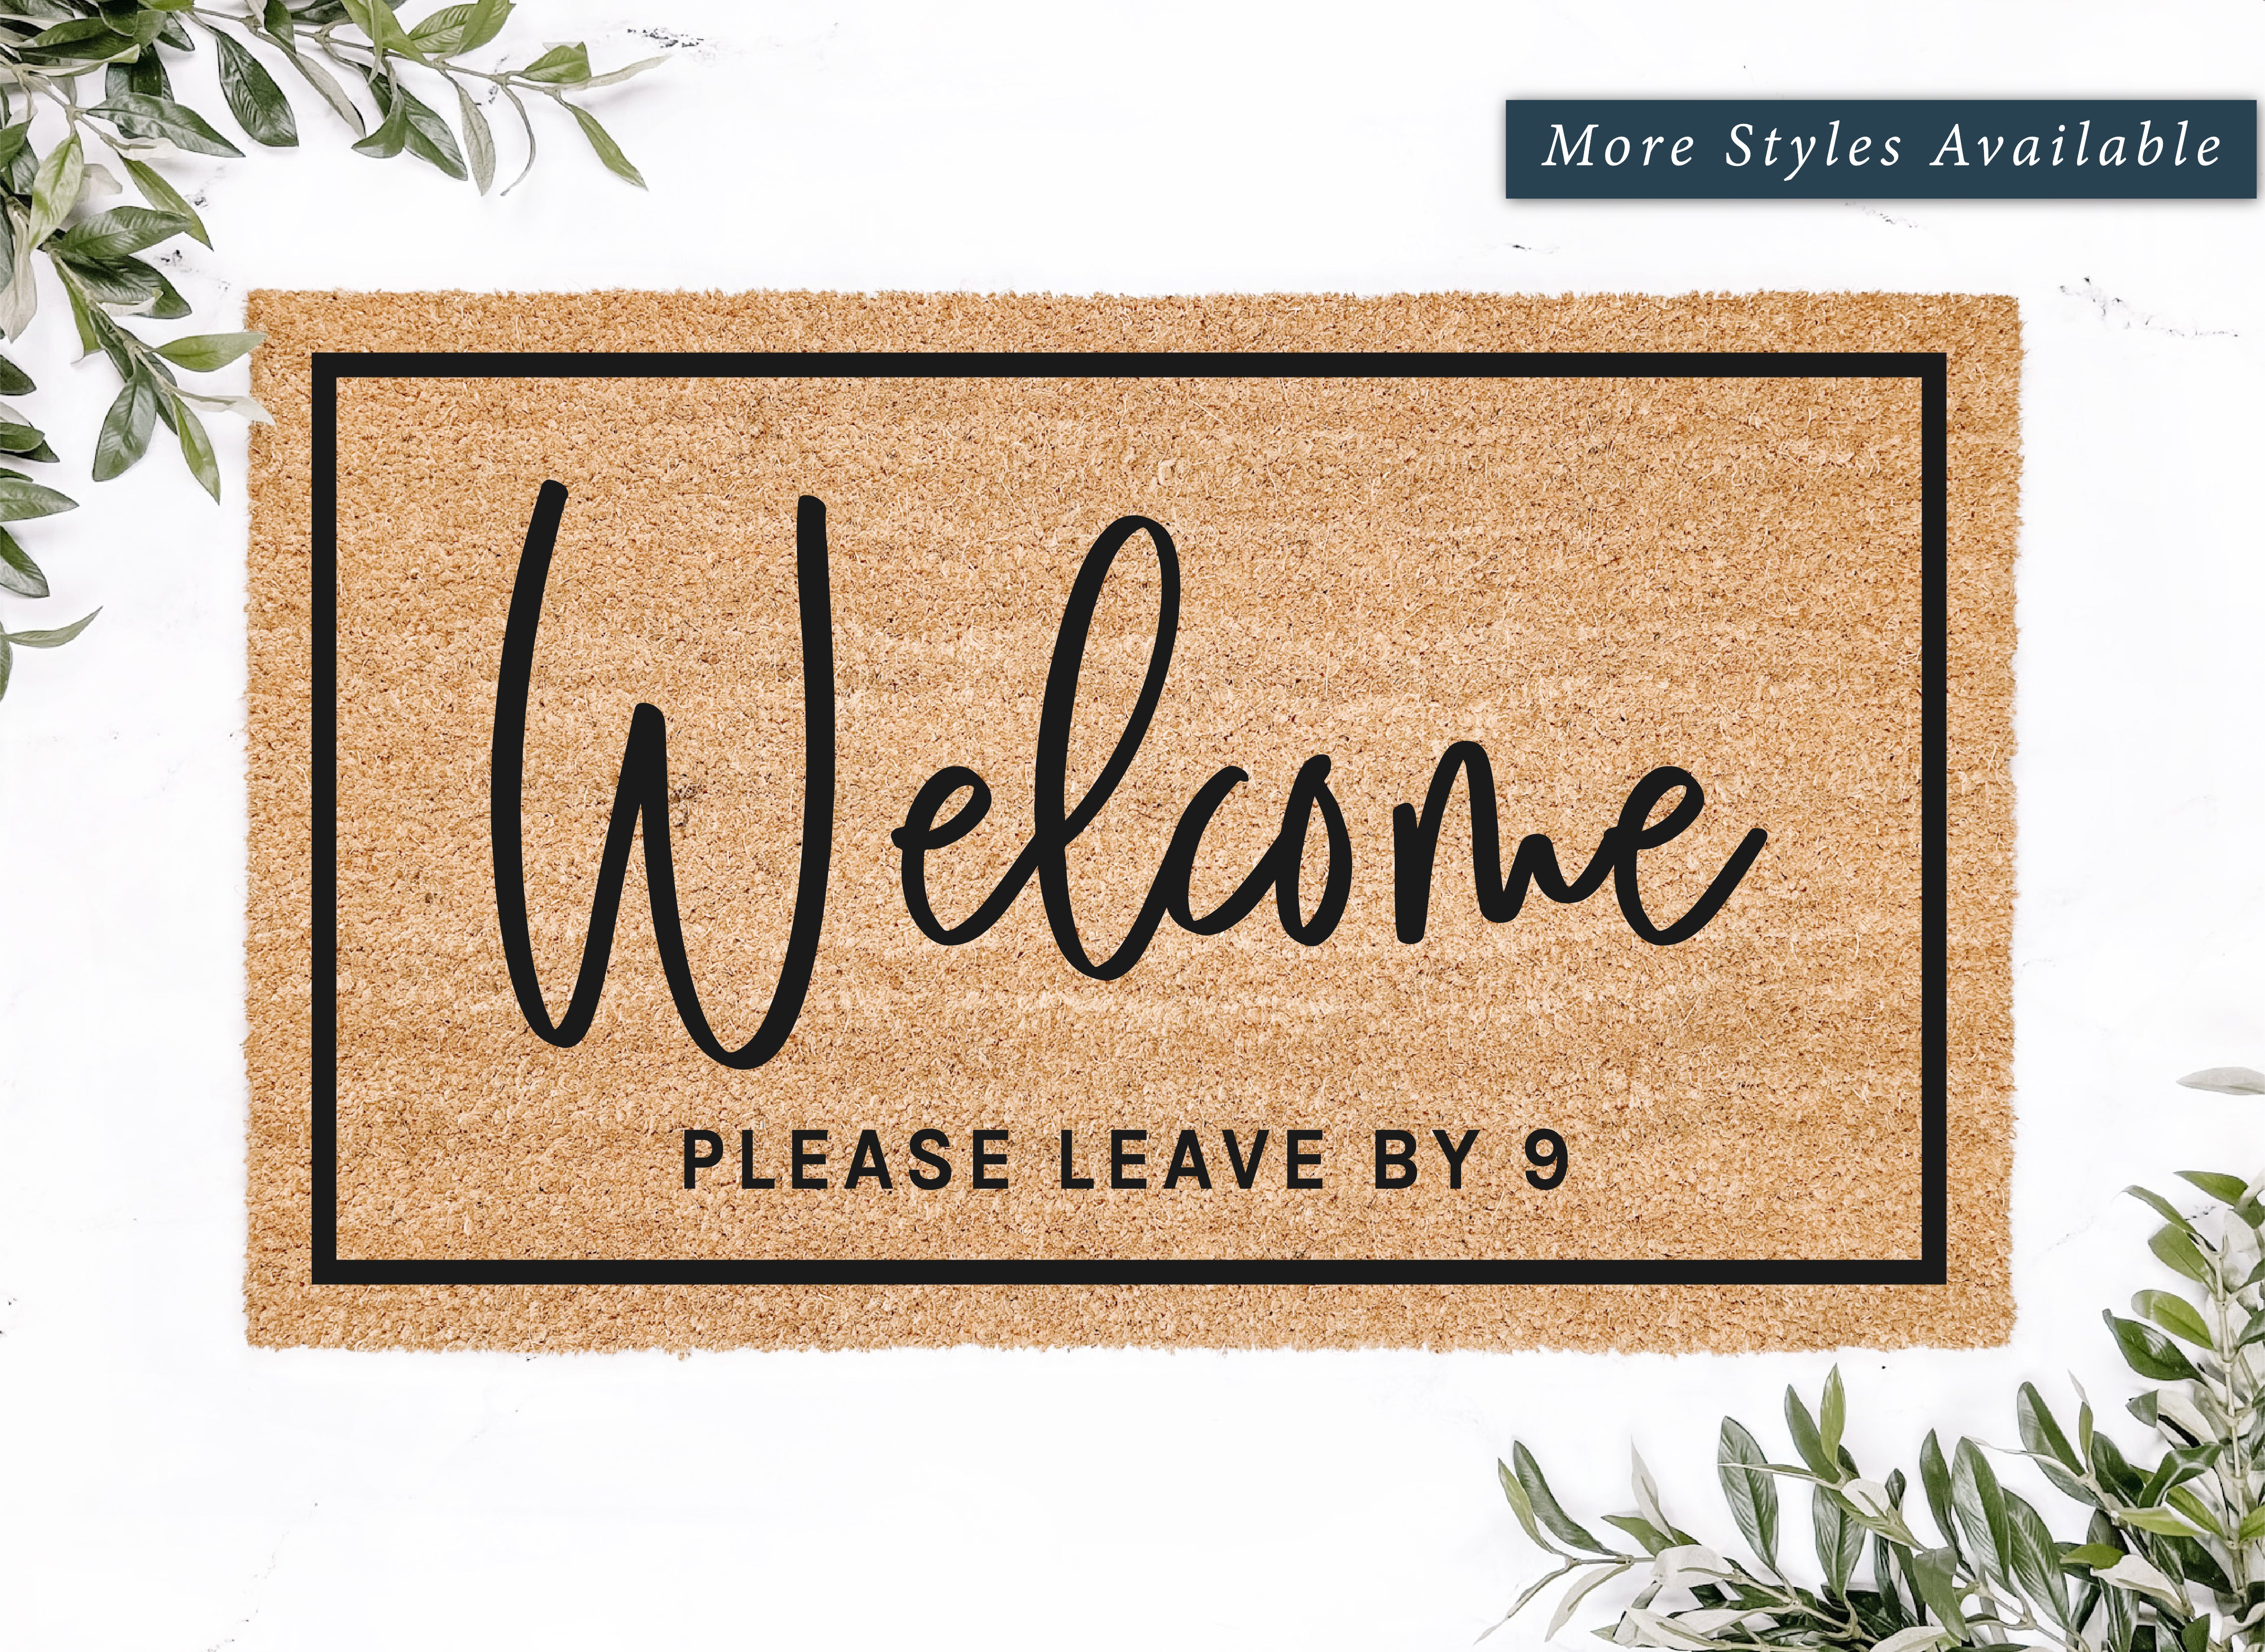 Welcome...Please Leave By 9 Doormat